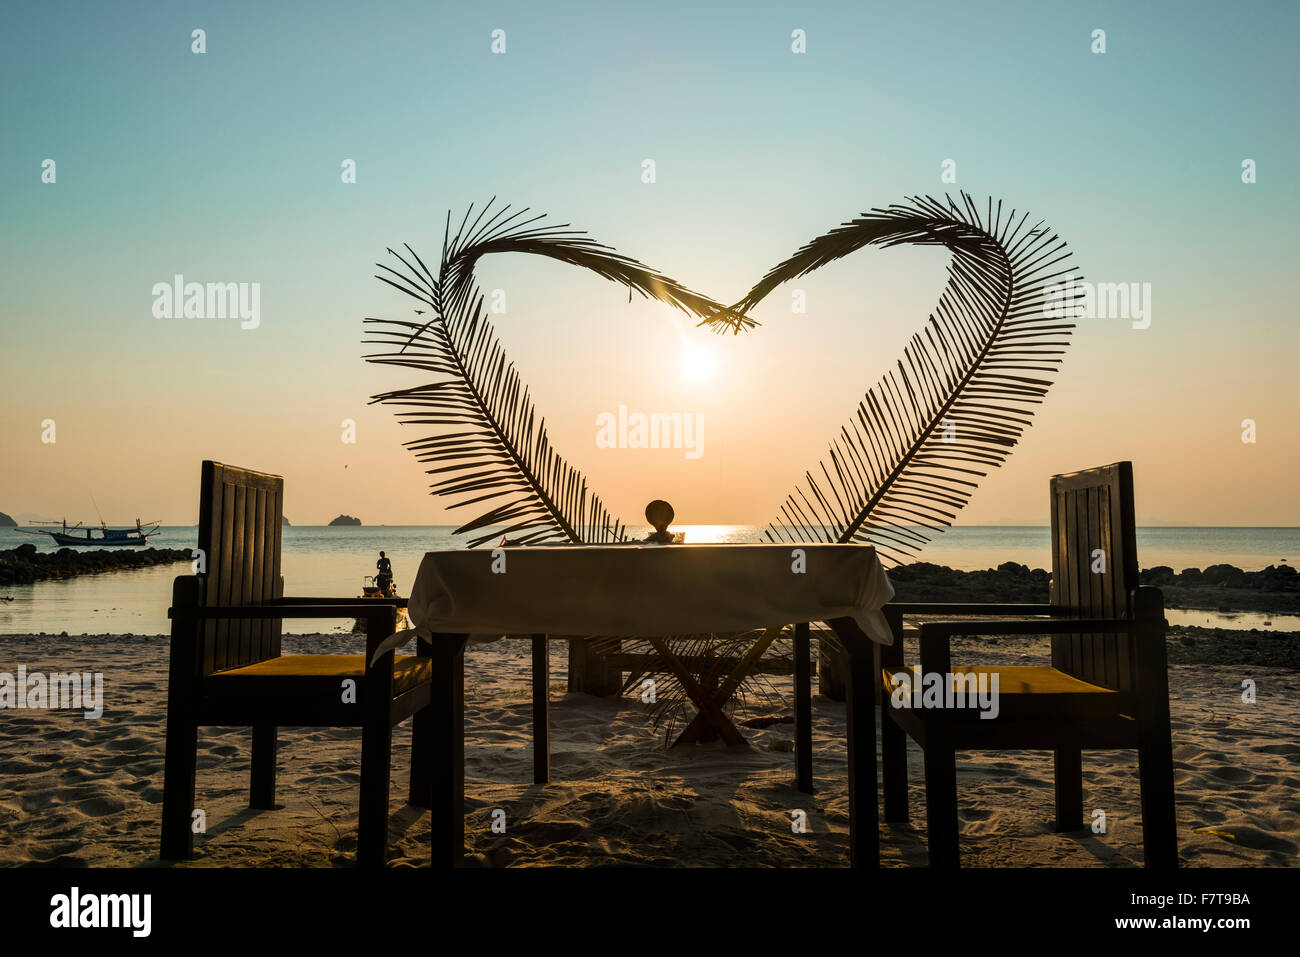 Table on the beach with a heart made of palm fronds, sunset, Koh Samui island, Gulf of Thailand, Thailand Stock Photo